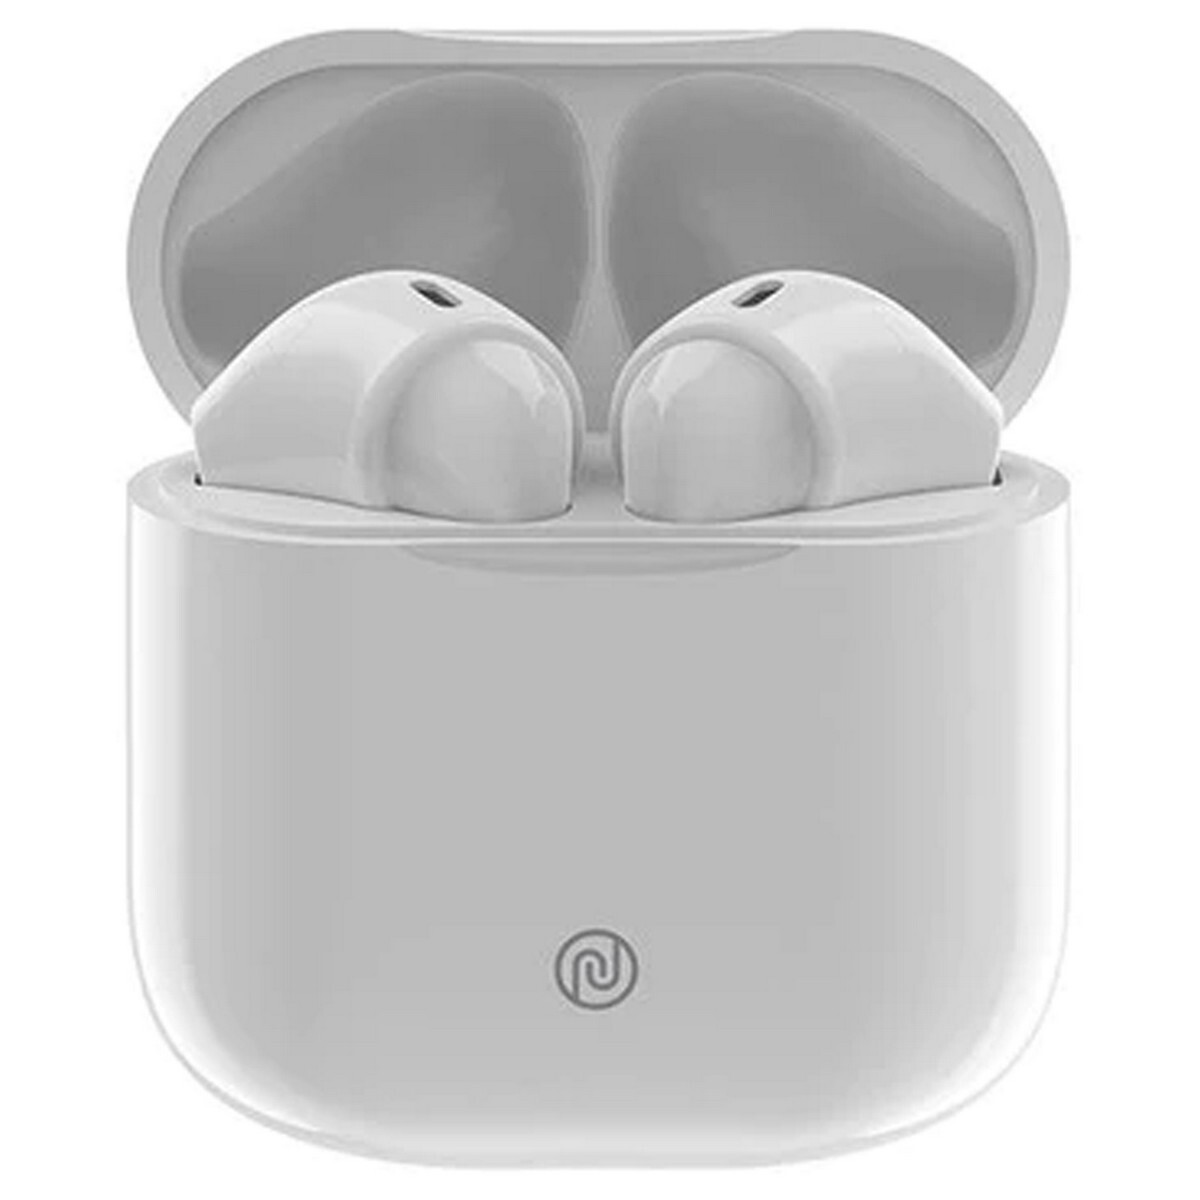 Noise Nano Truly Wireless Airbuds Pearl White